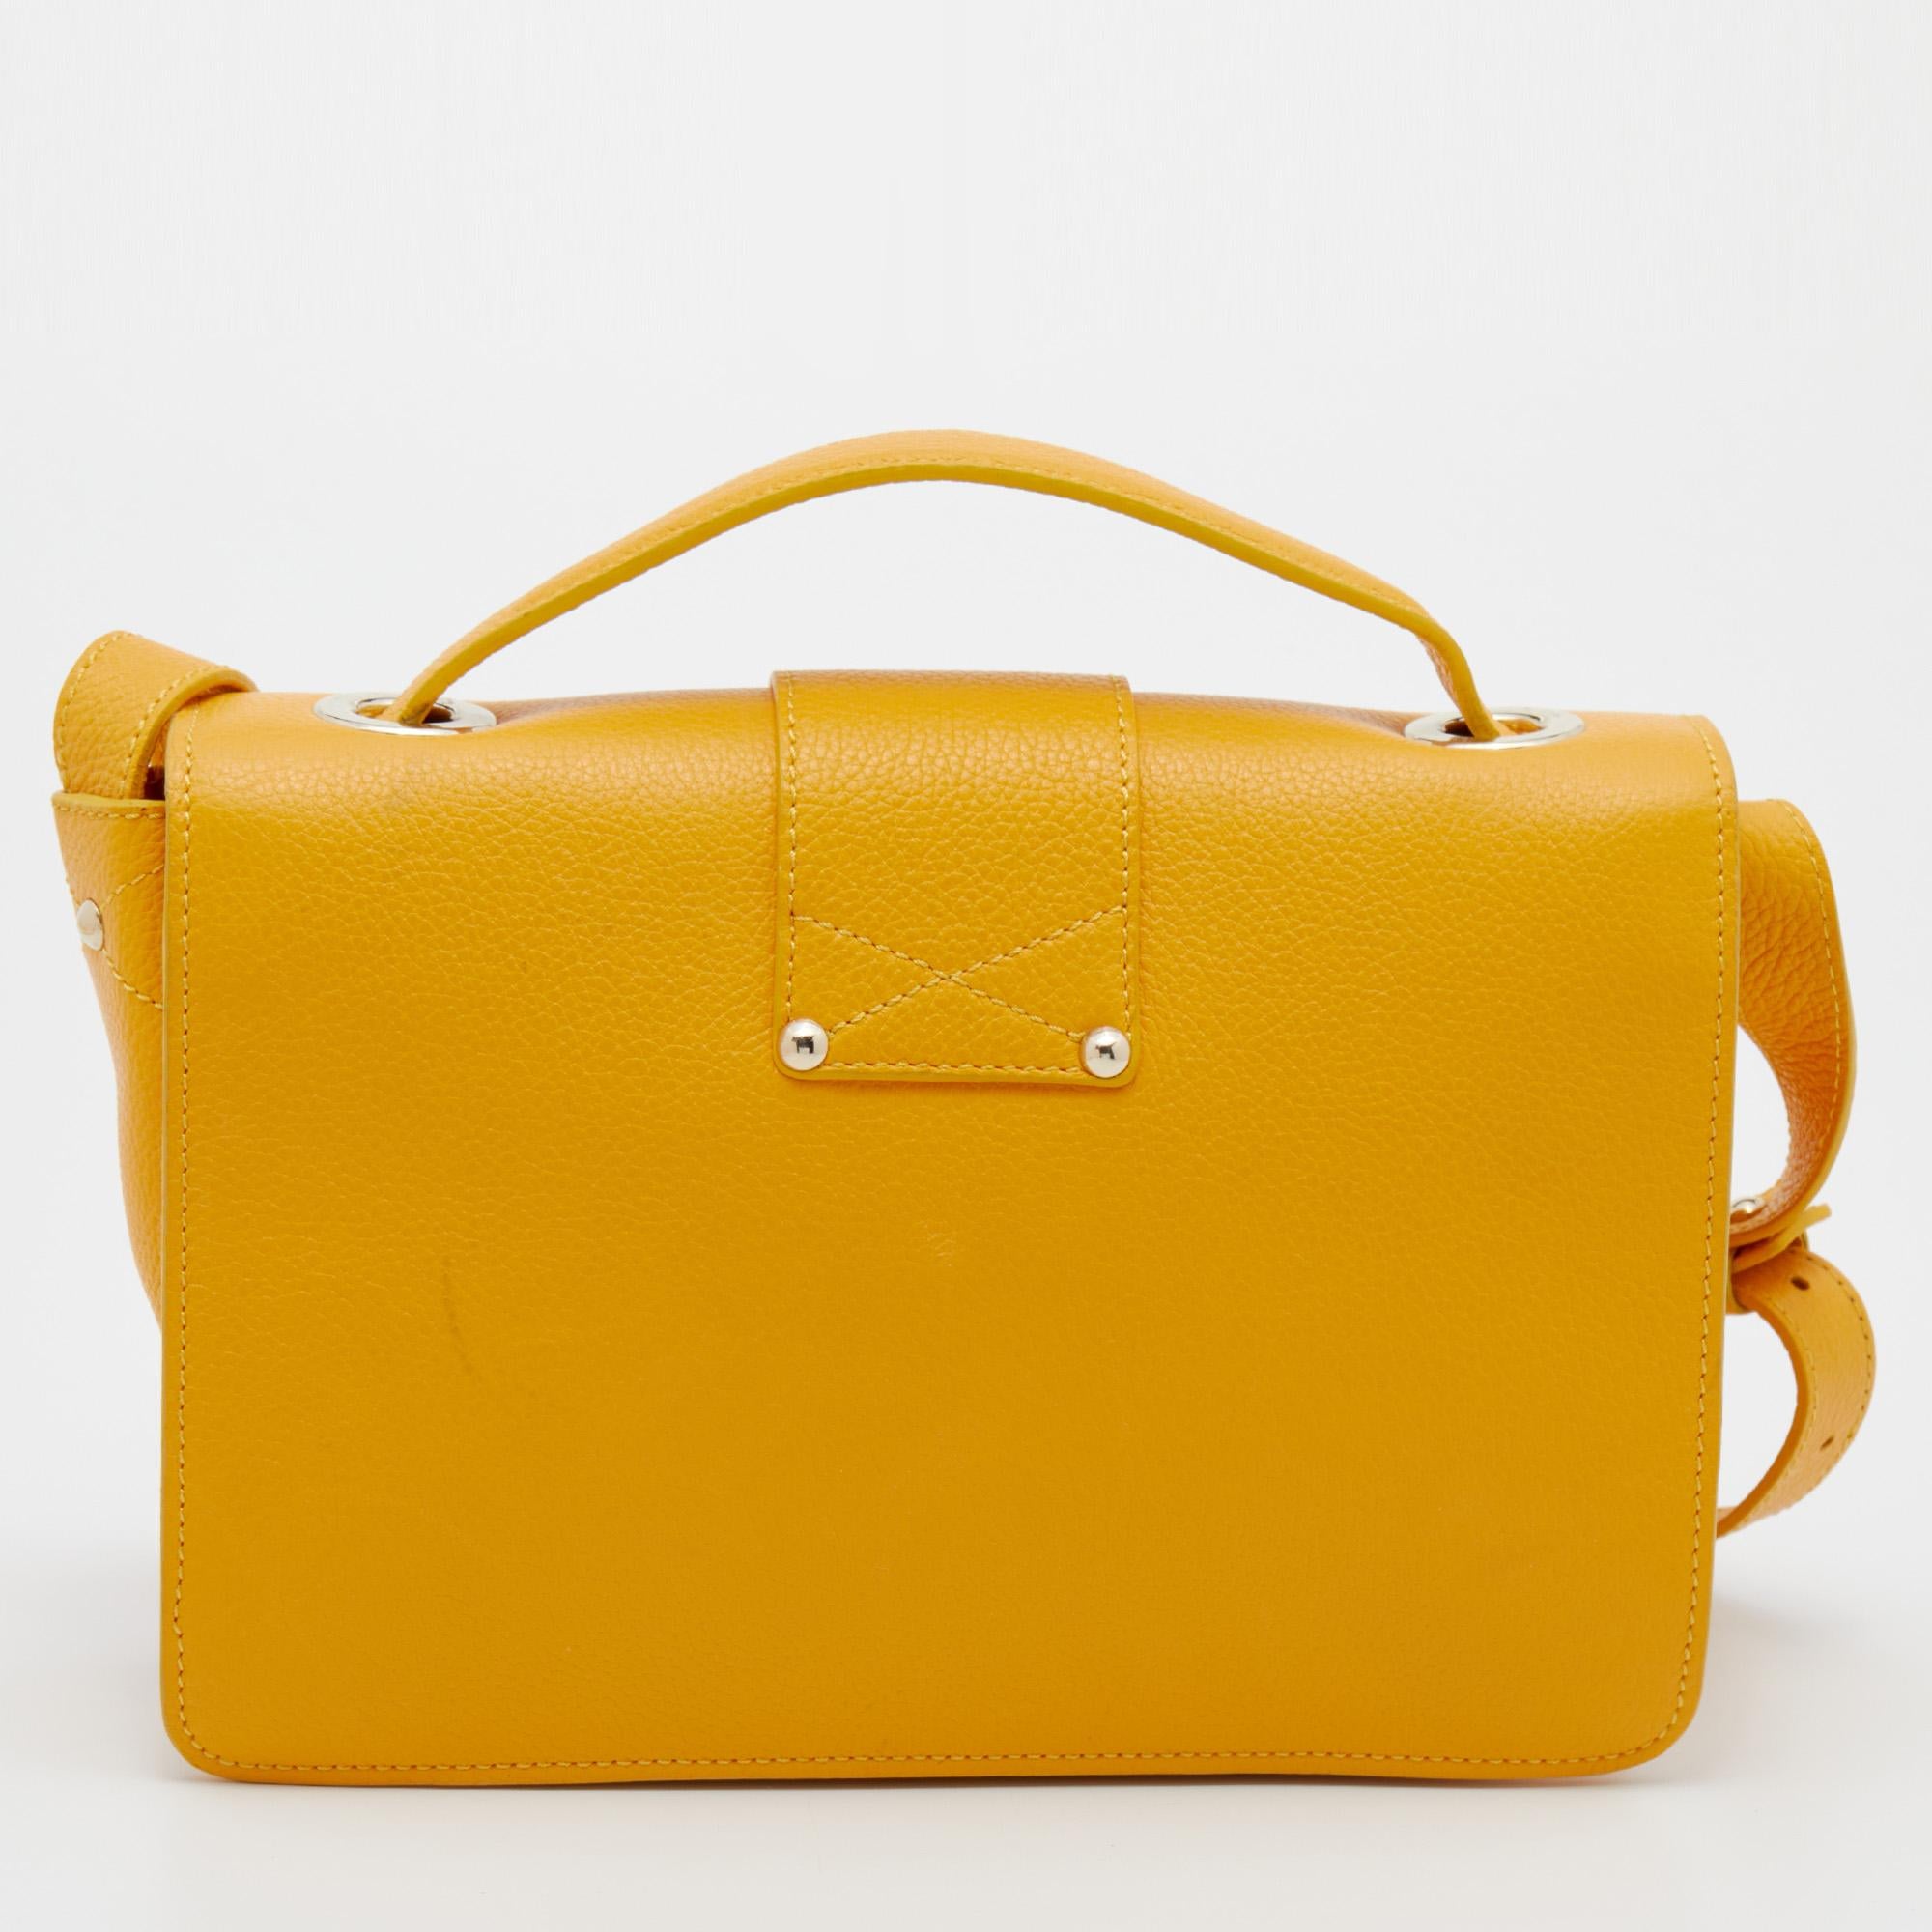 This lovely Rebel top handle bag from Jimmy Choo is high on appeal and style. It is crafted from leather and designed with a flap that has a gold-tone lock leading to an Alcantara-lined interior. The bright yellow bag is held by a top handle and an